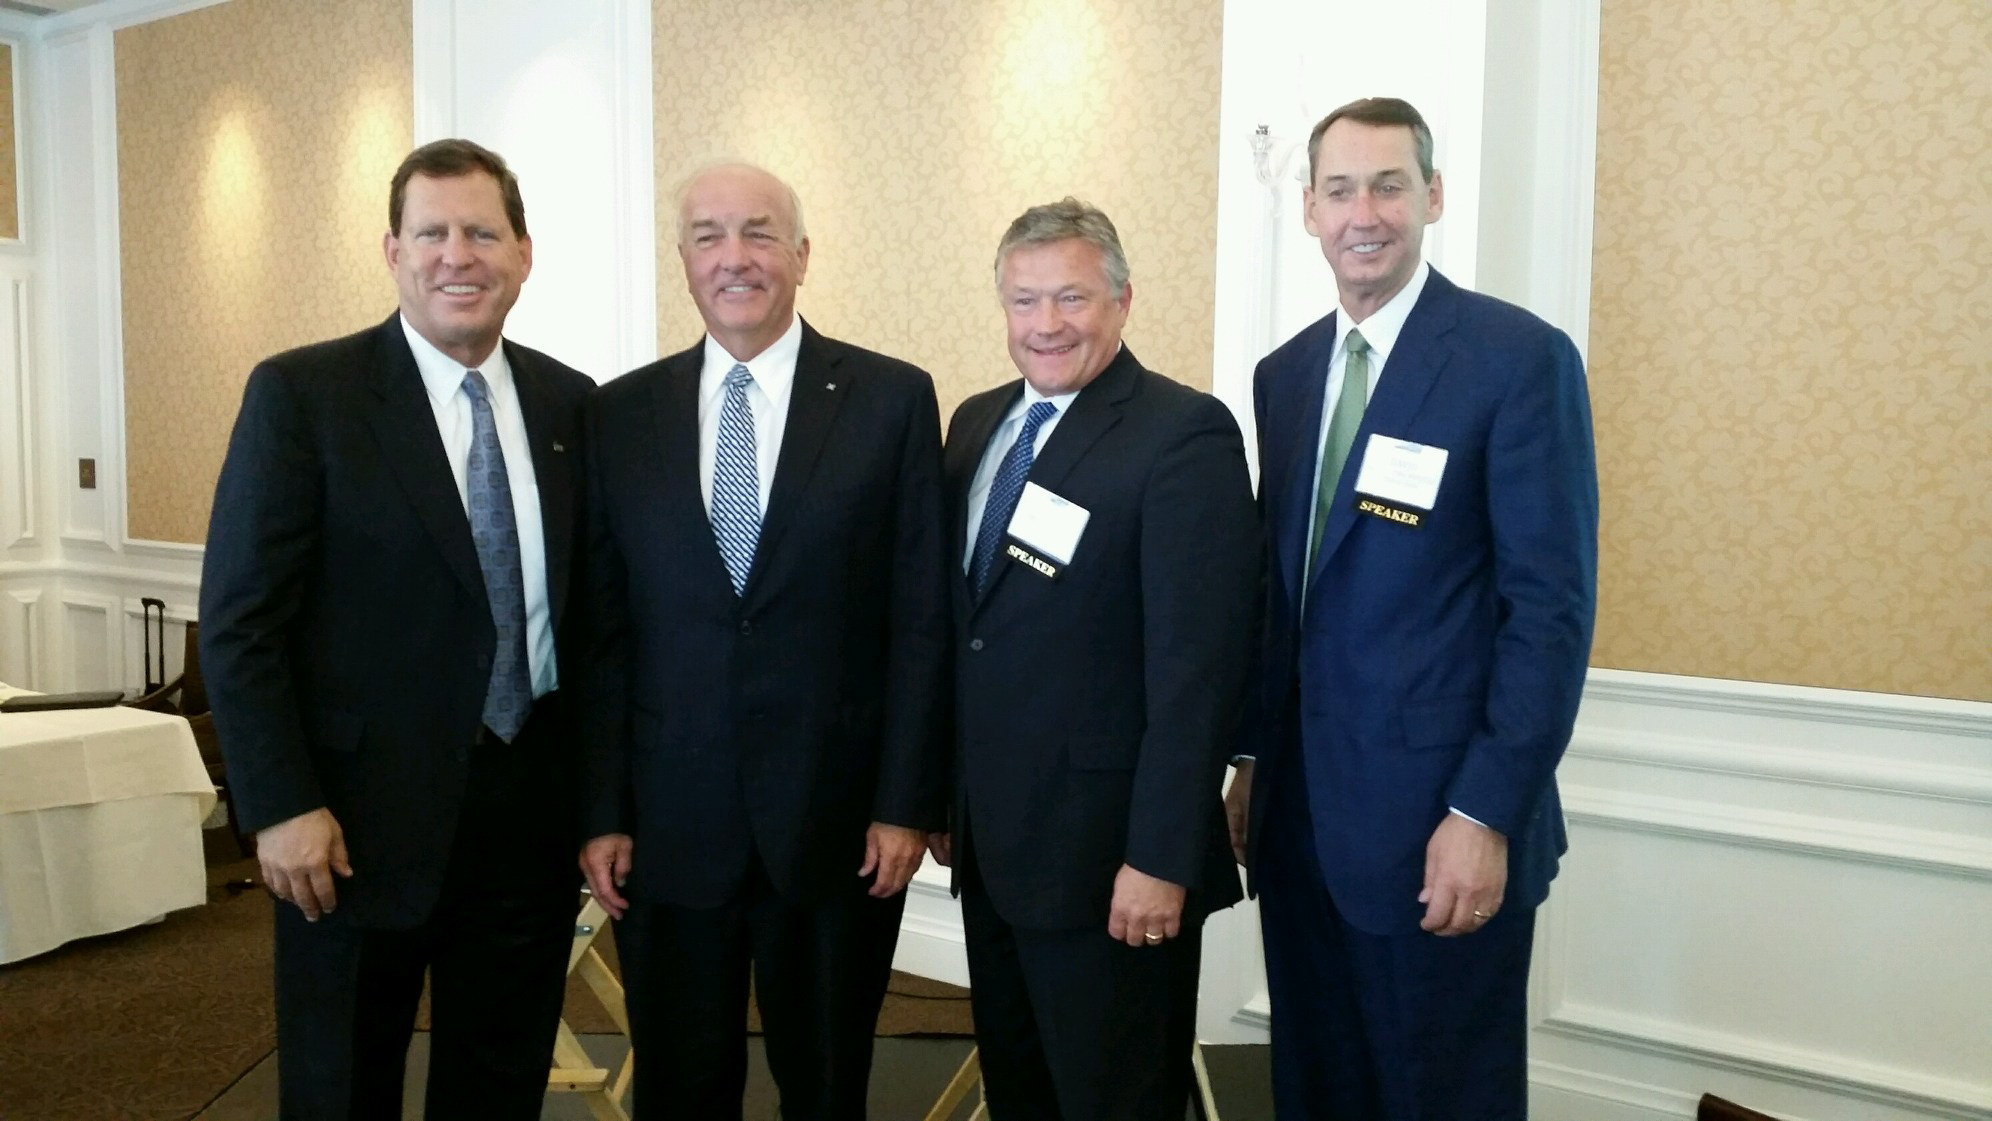 Clearinghouse CDFI President/ CEO Douglas Bystry Speaks at OC RMA 'Banking Leaders CEO Panel